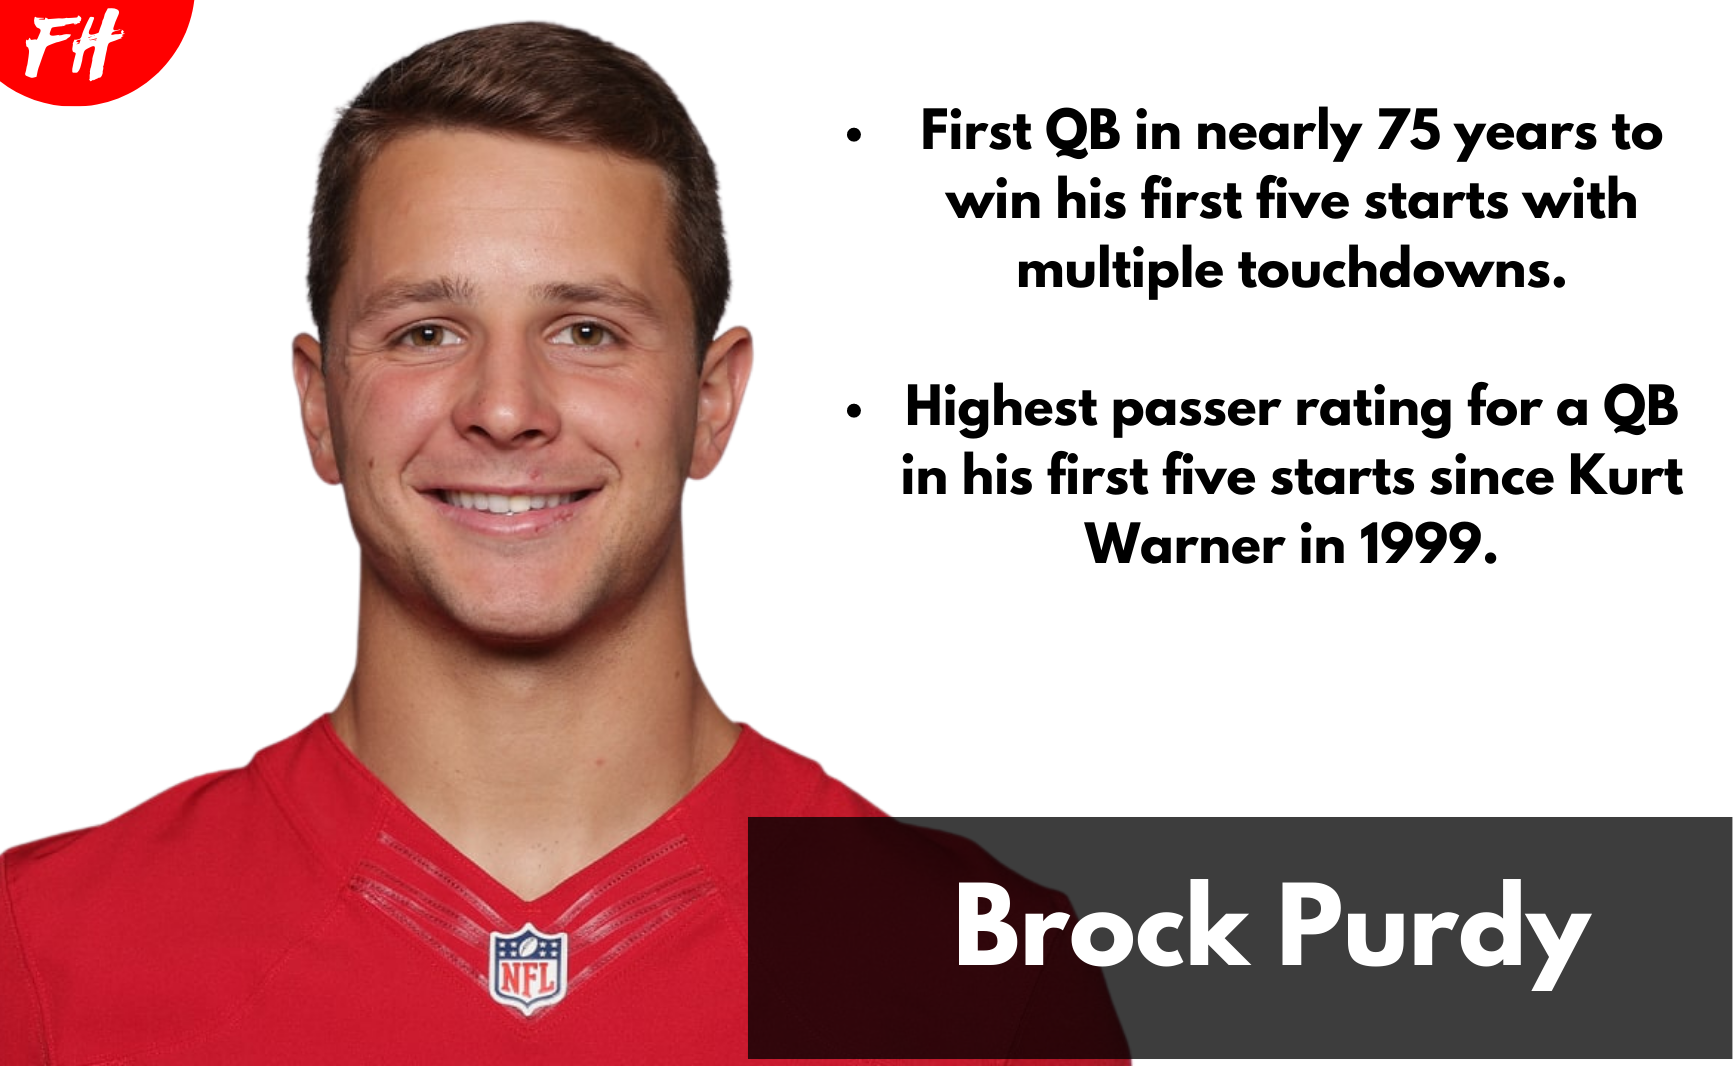 highest passer rating for a QB in his first five starts since Kurt Warner in 1999. 